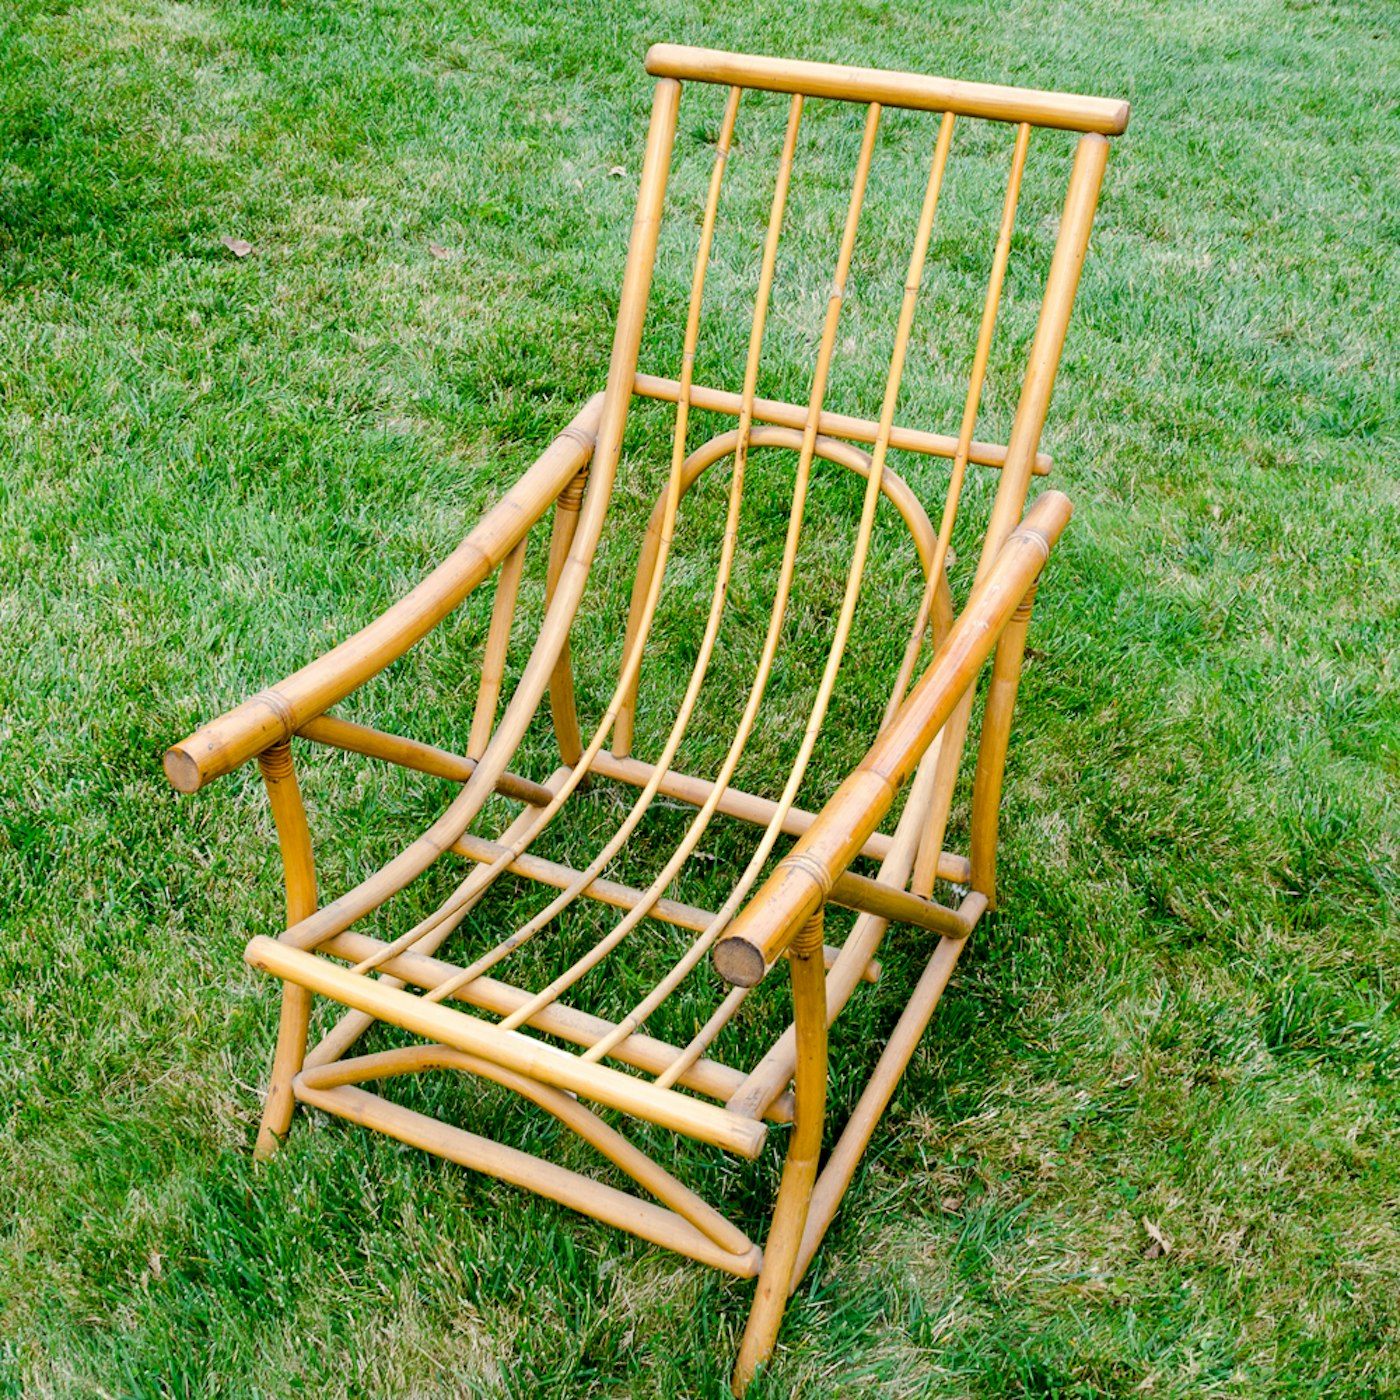 Bamboo Outdoor Furniture : bamboo chair - 6 - patiodept (China